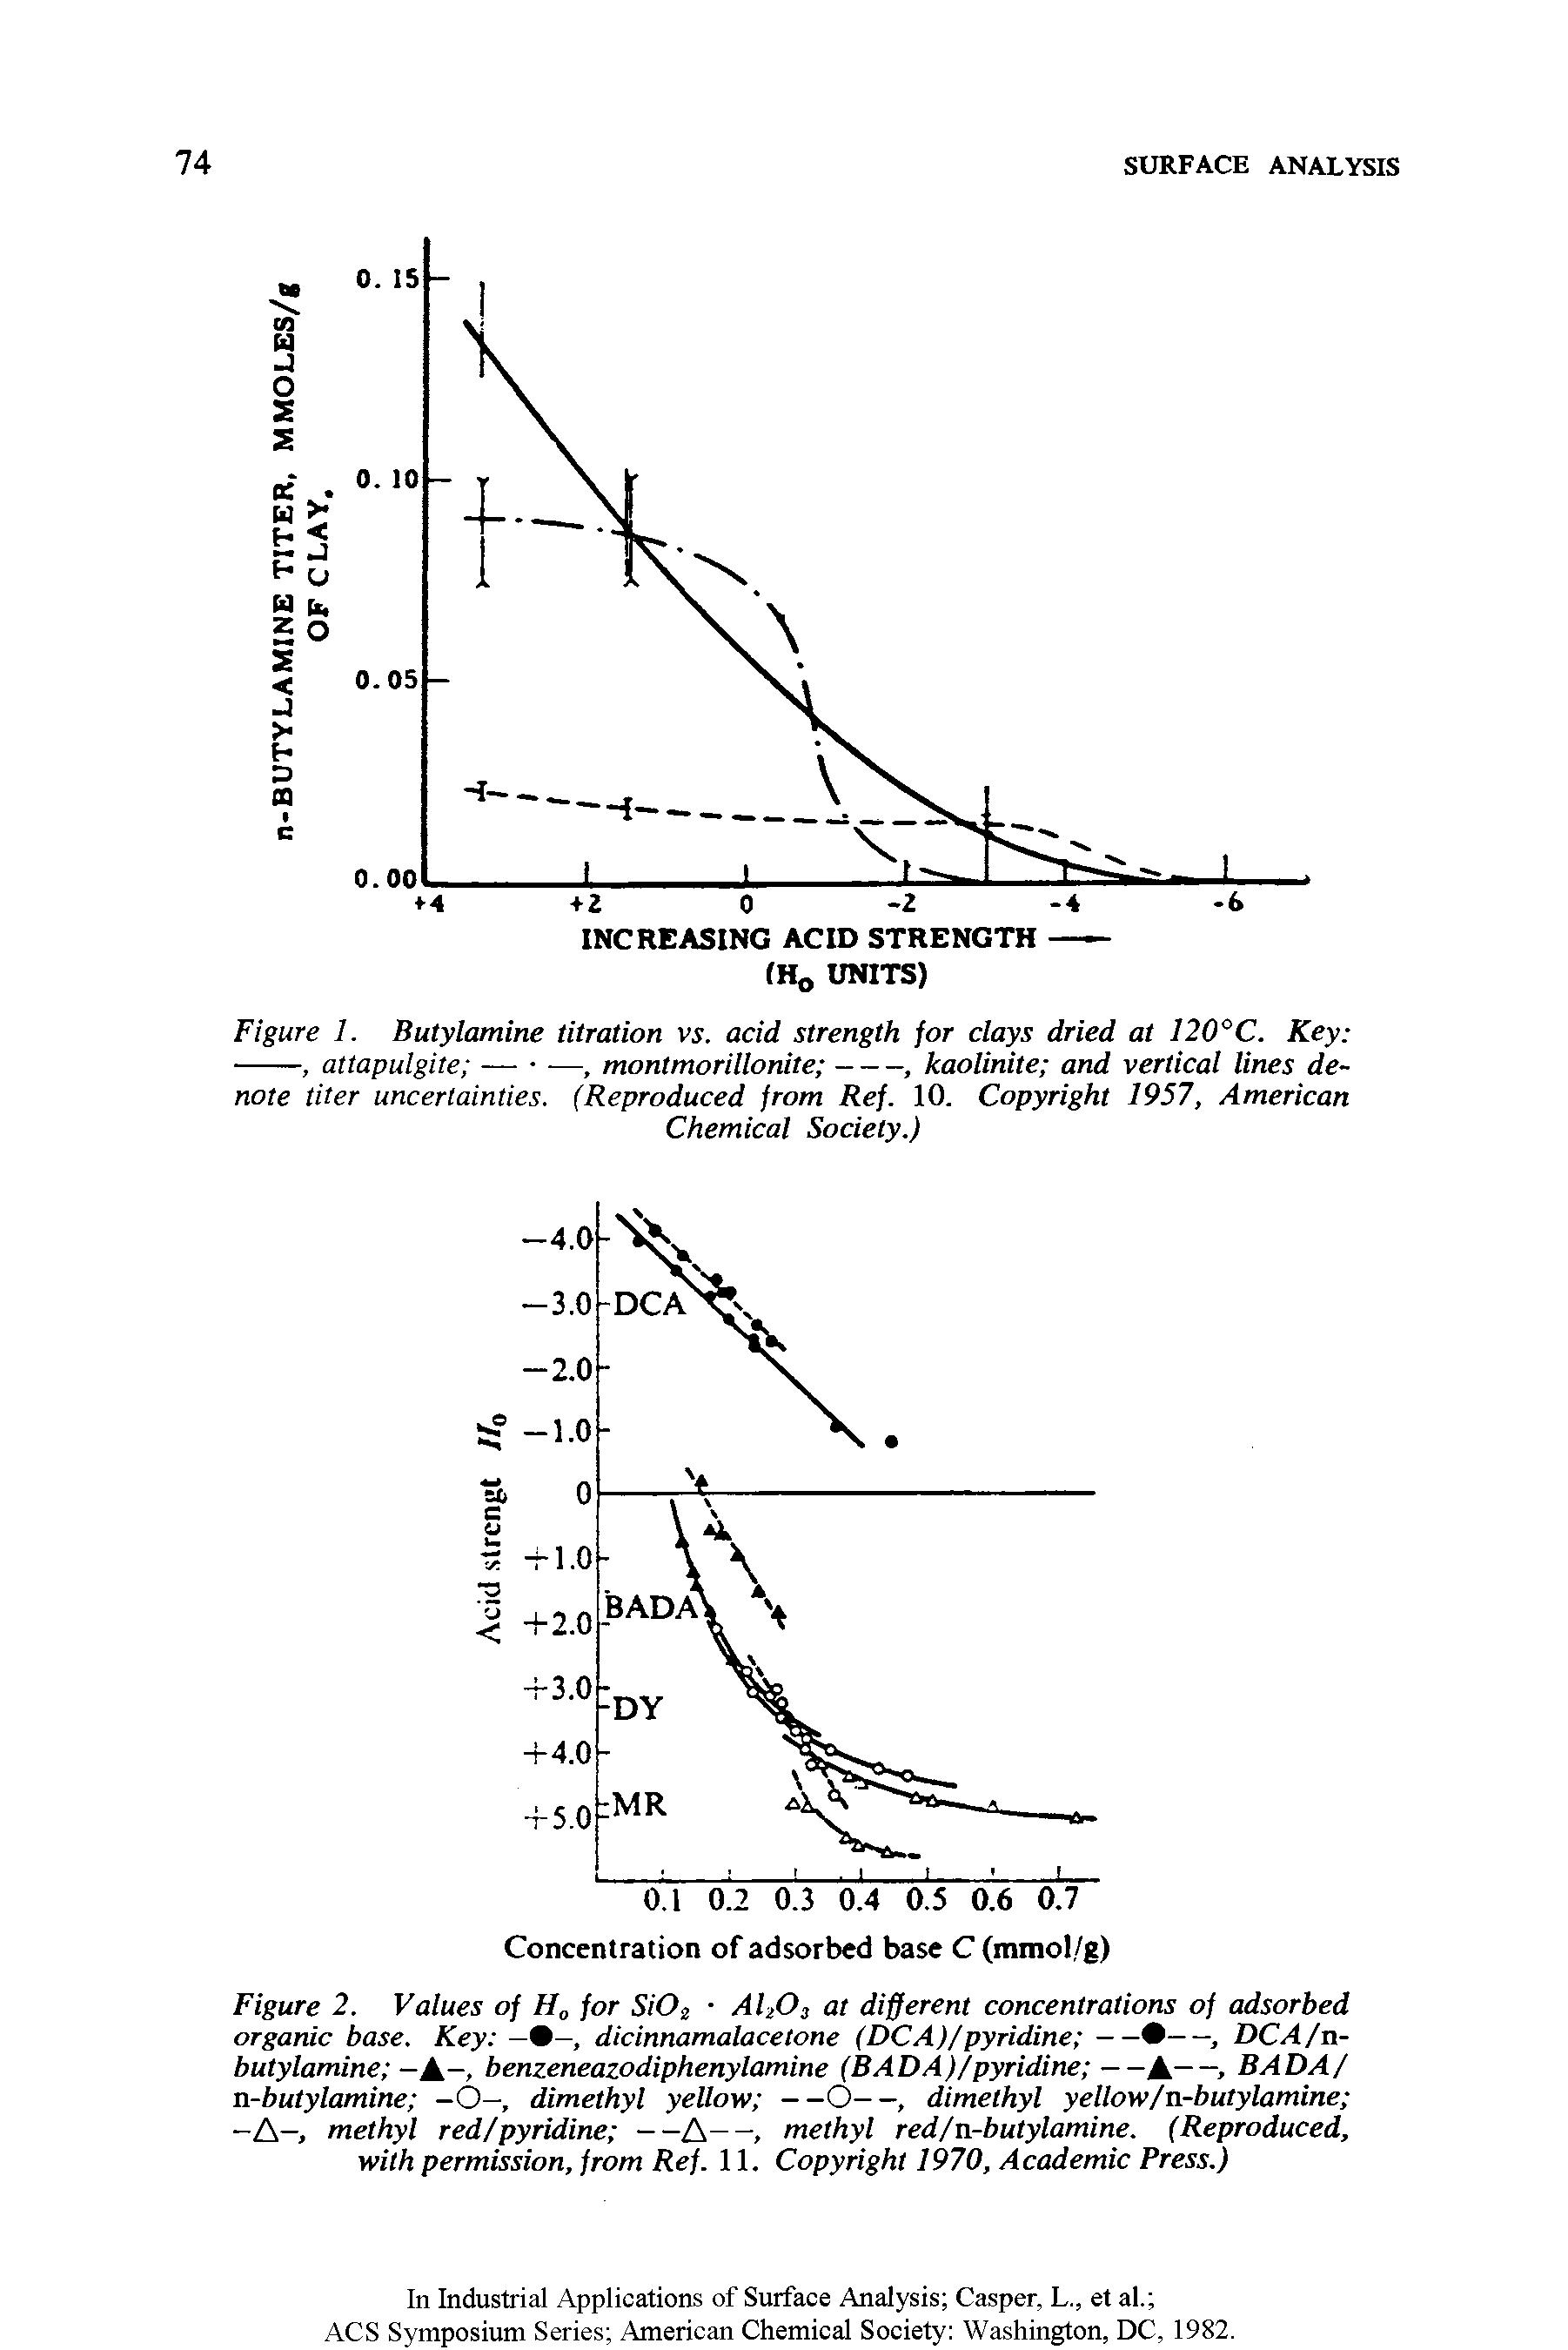 Figure 1. Butylamine titration vs. acid strength for clays dried at 120°C. Key -----, attapulgite — —, montmorillonite -----, kaolinite and vertical lines denote titer uncertainties. (Reproduced from Ref. 10. Copyright 1957, American...